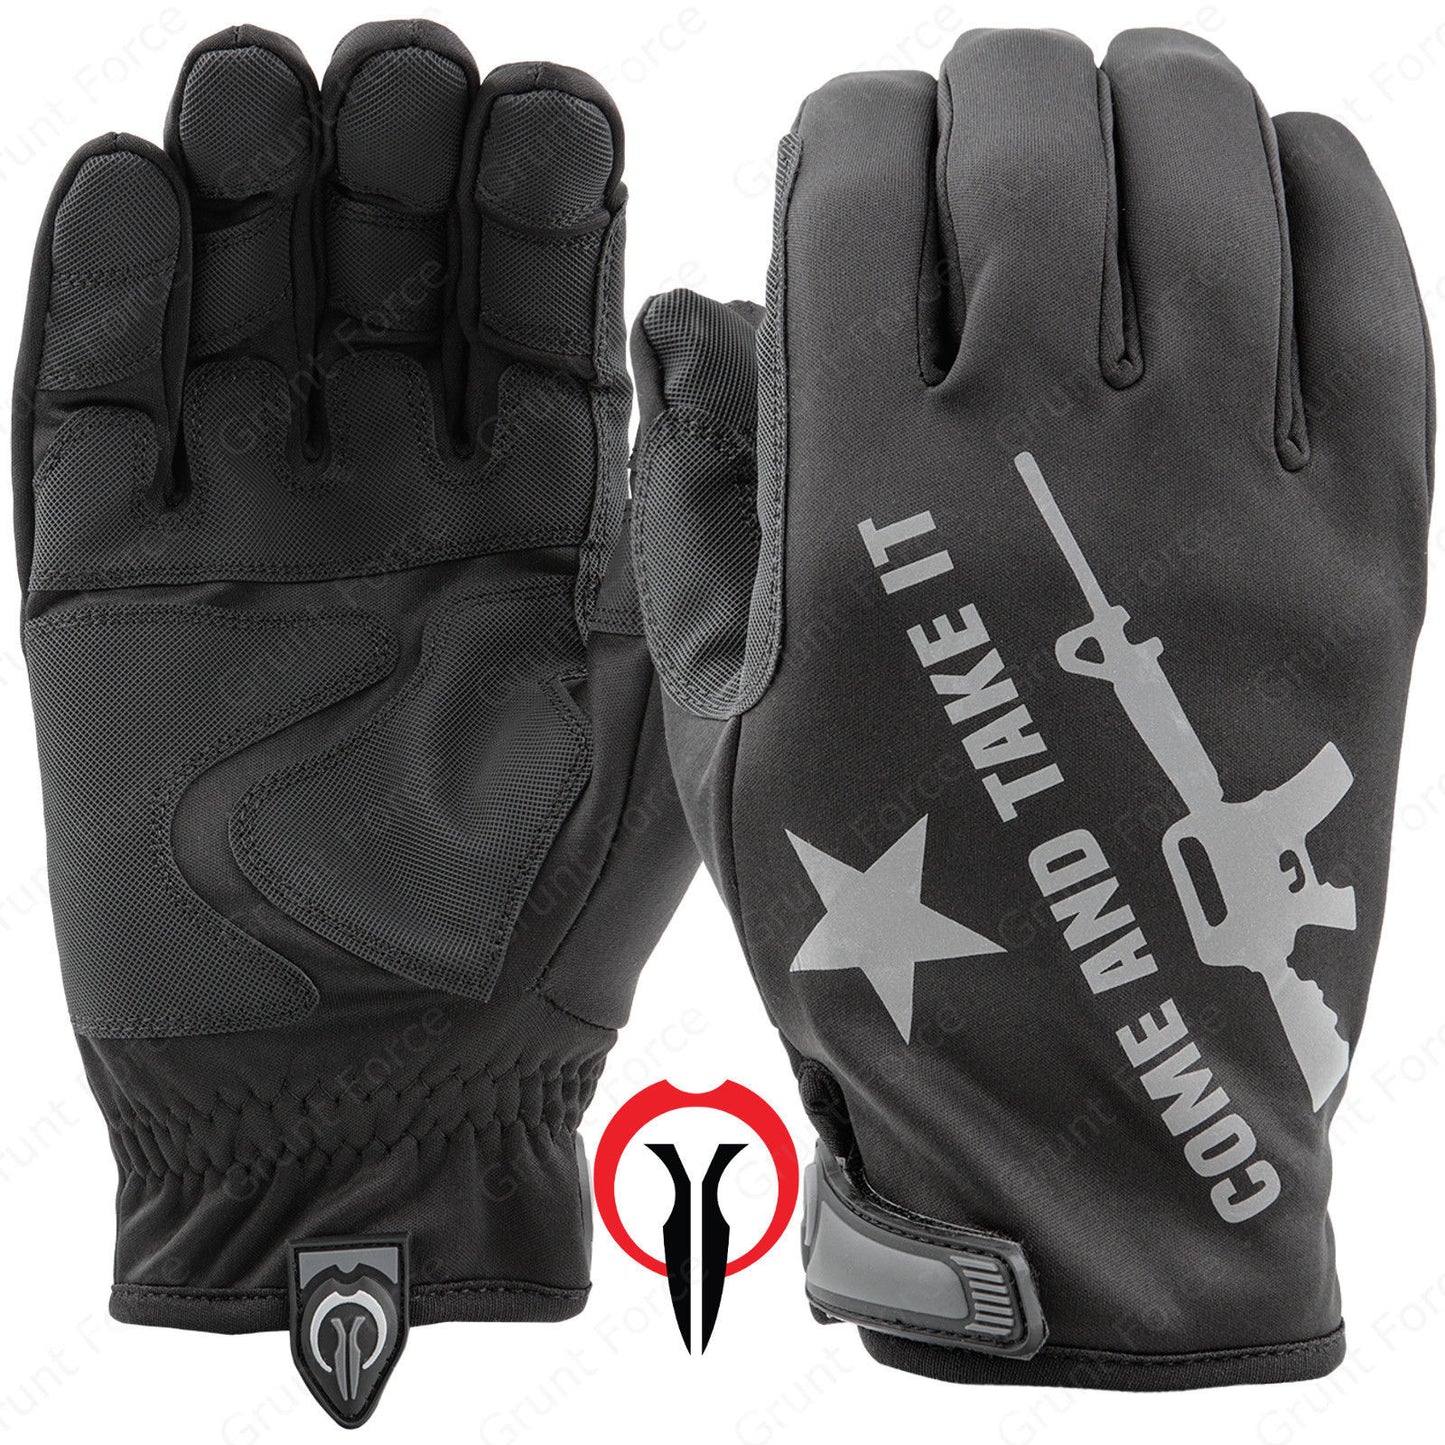 Industrious Handwear Full Finger Black "Come and Take It" Reflective Gloves